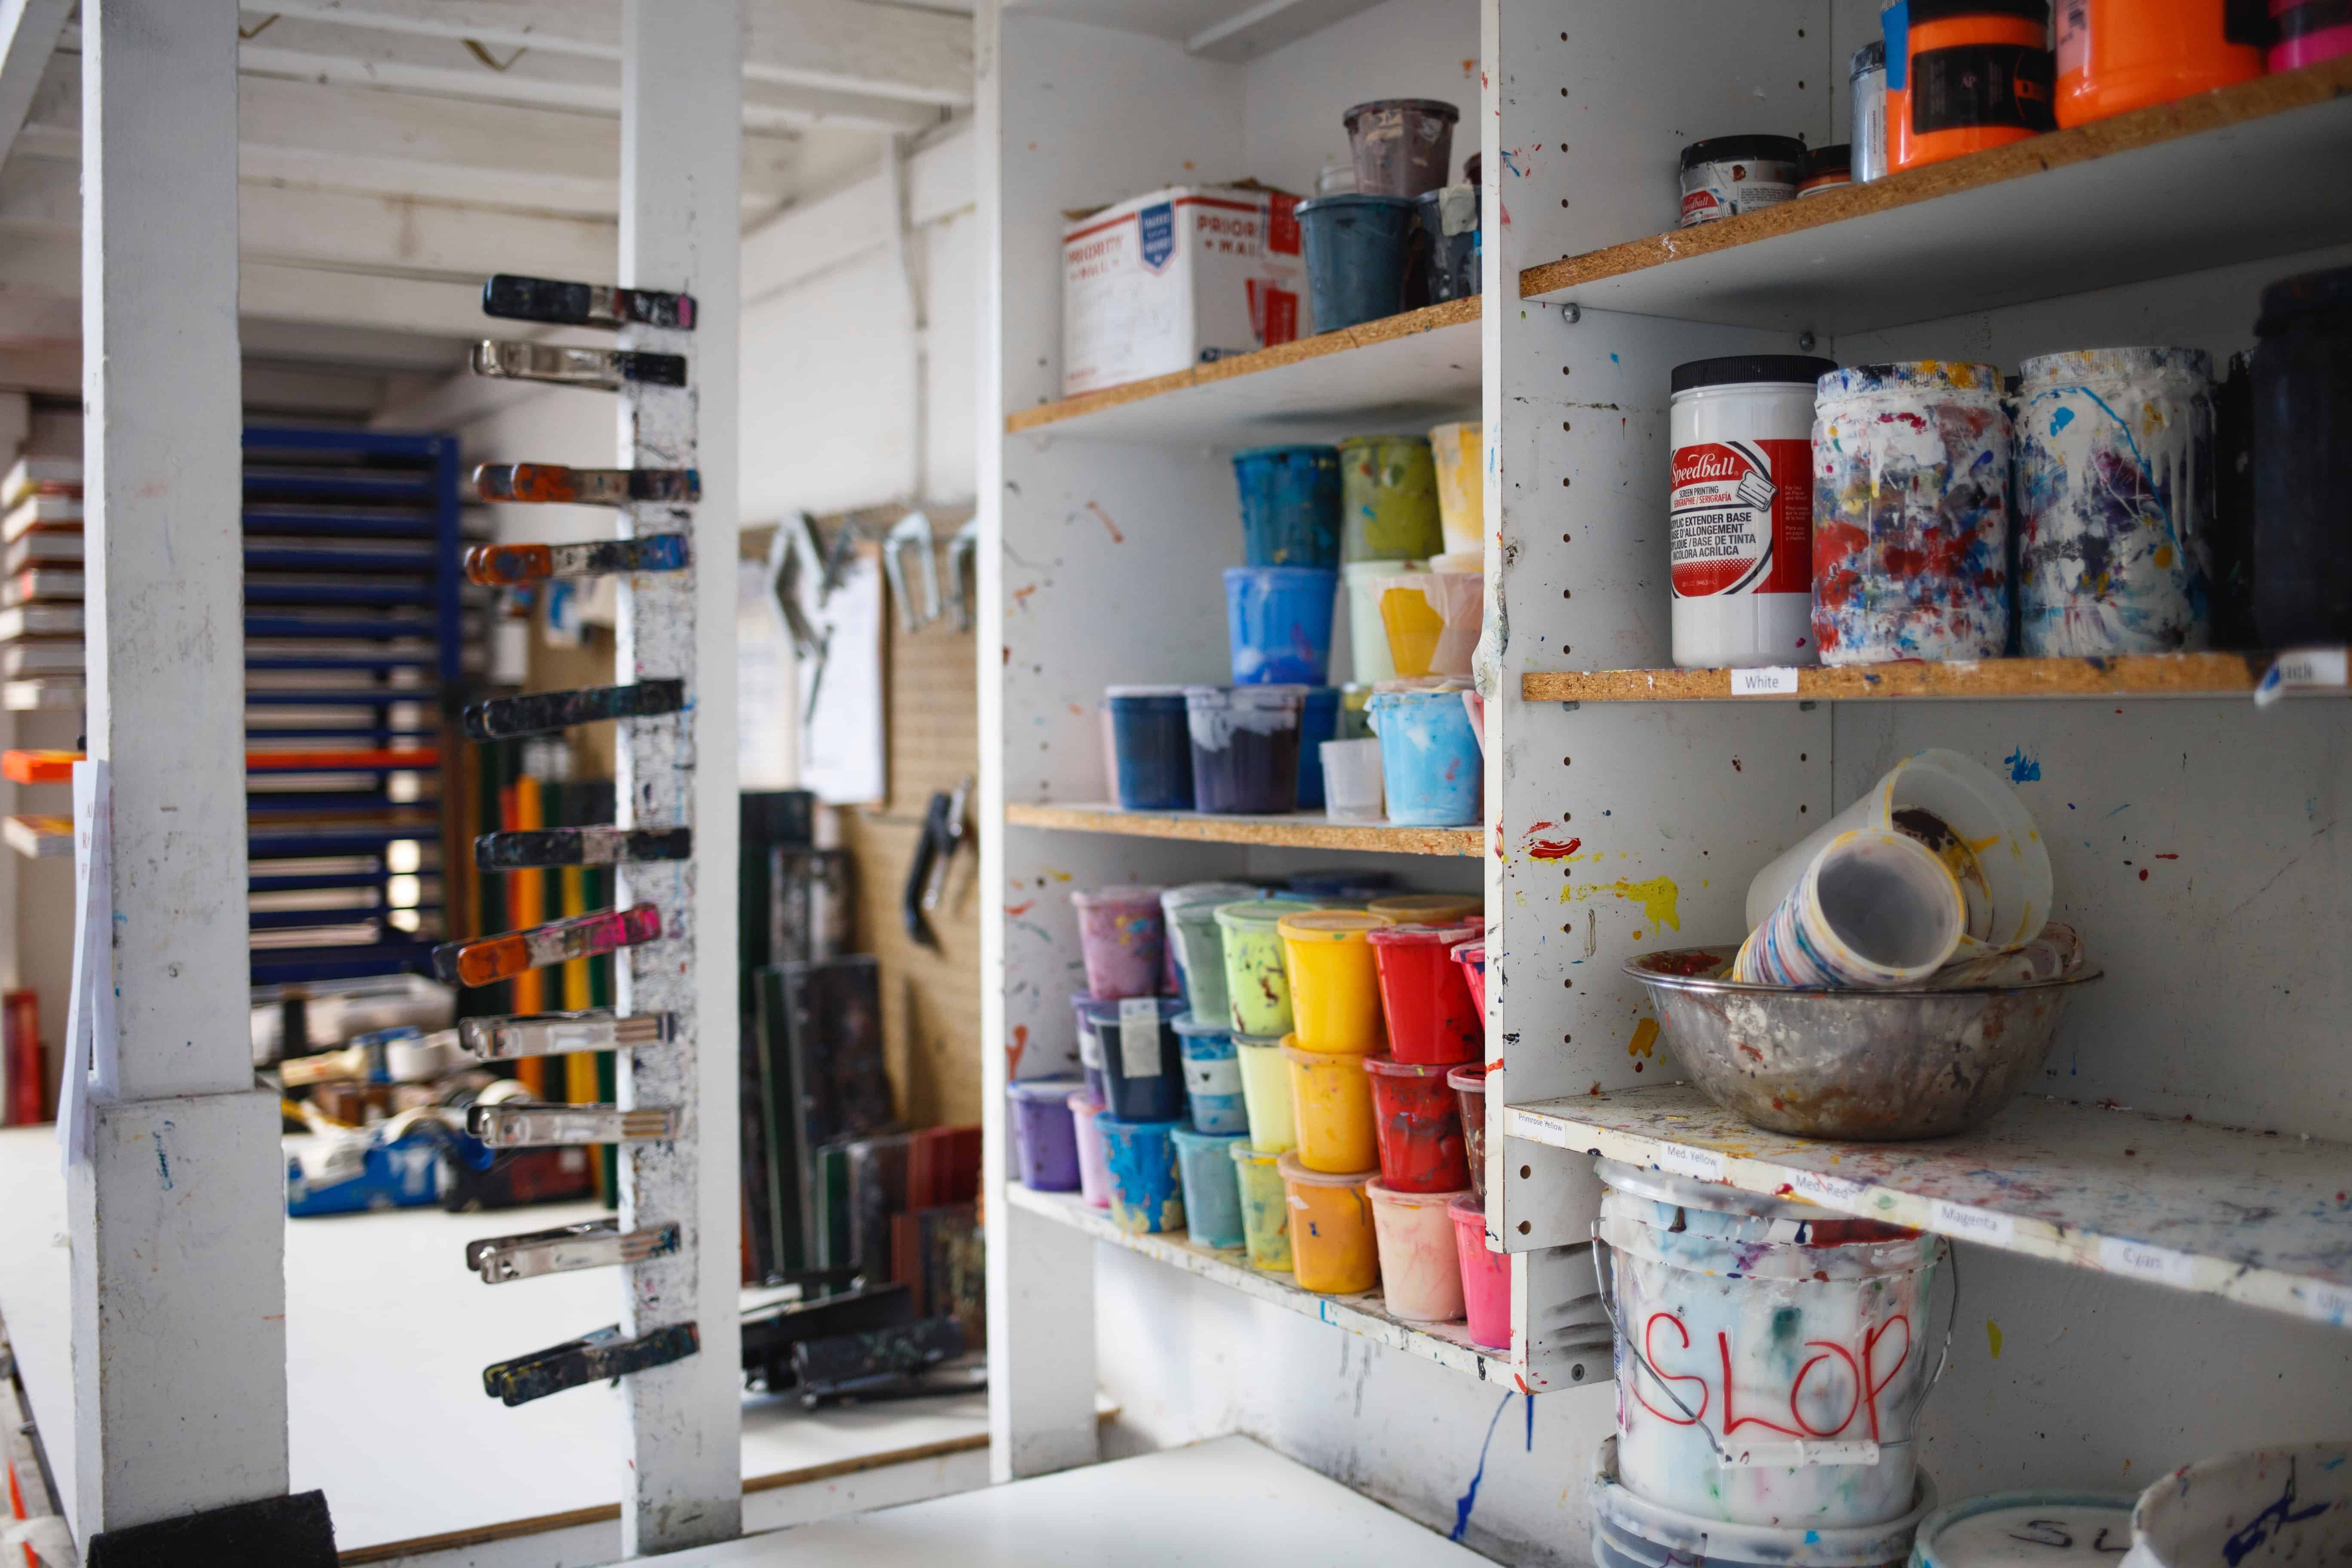 10 Quick Hacks To Organize Your Garage Fast